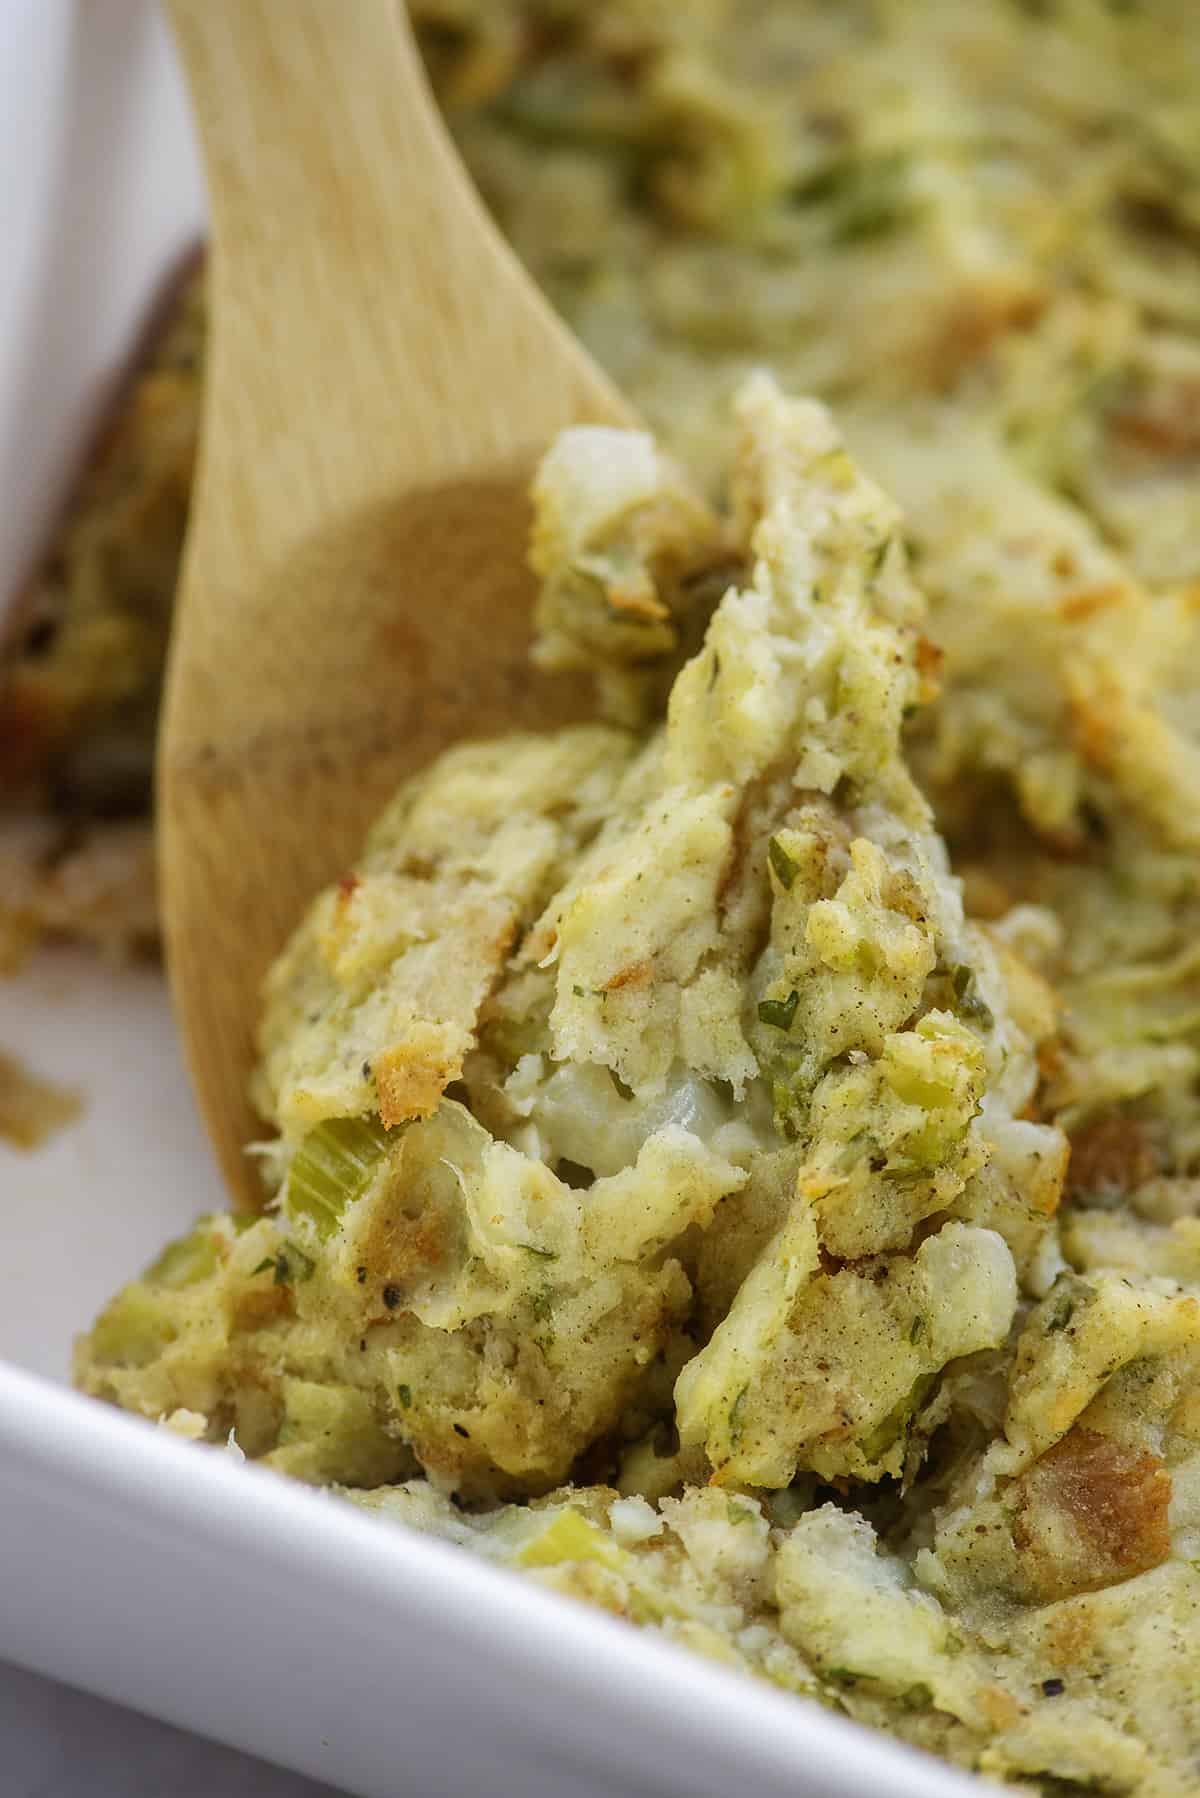 Mashed potato stuffing in dish on wooden spoon.